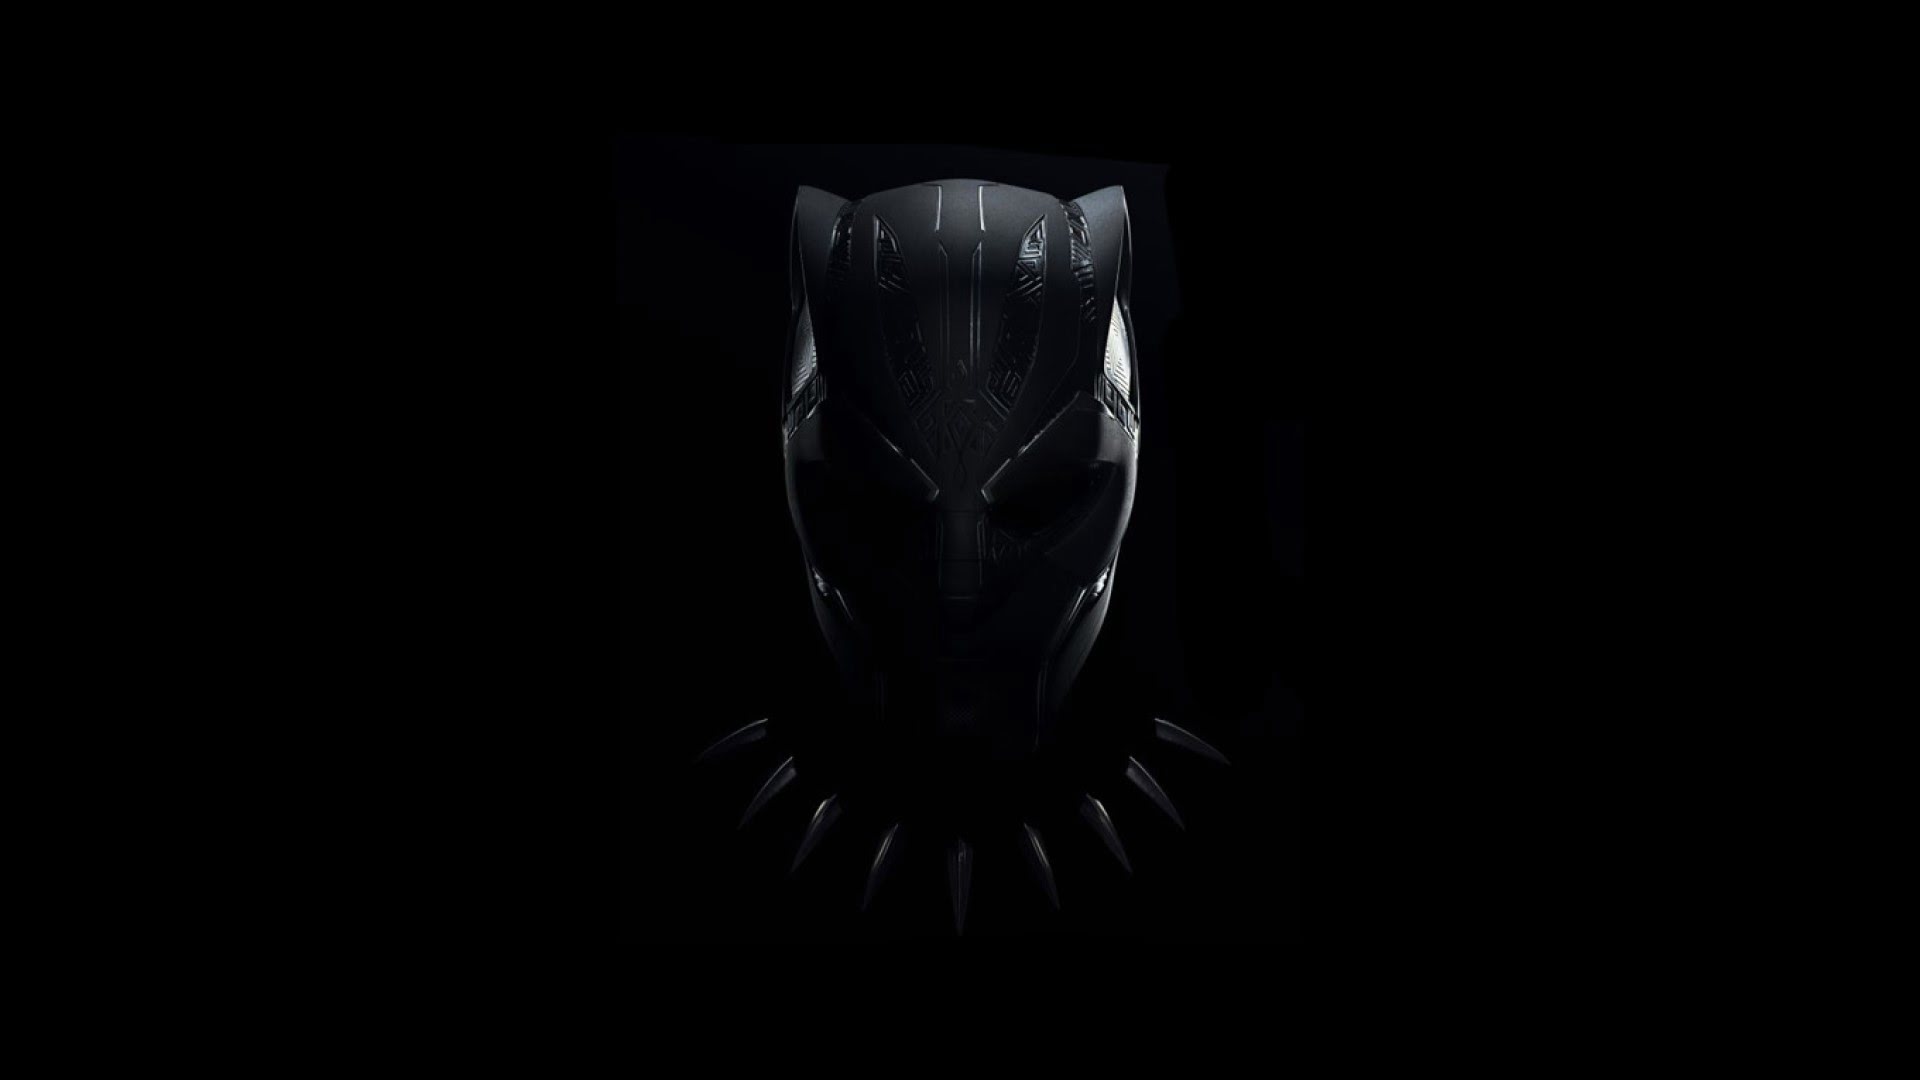 Black Panther Helmet And A New Game Coming